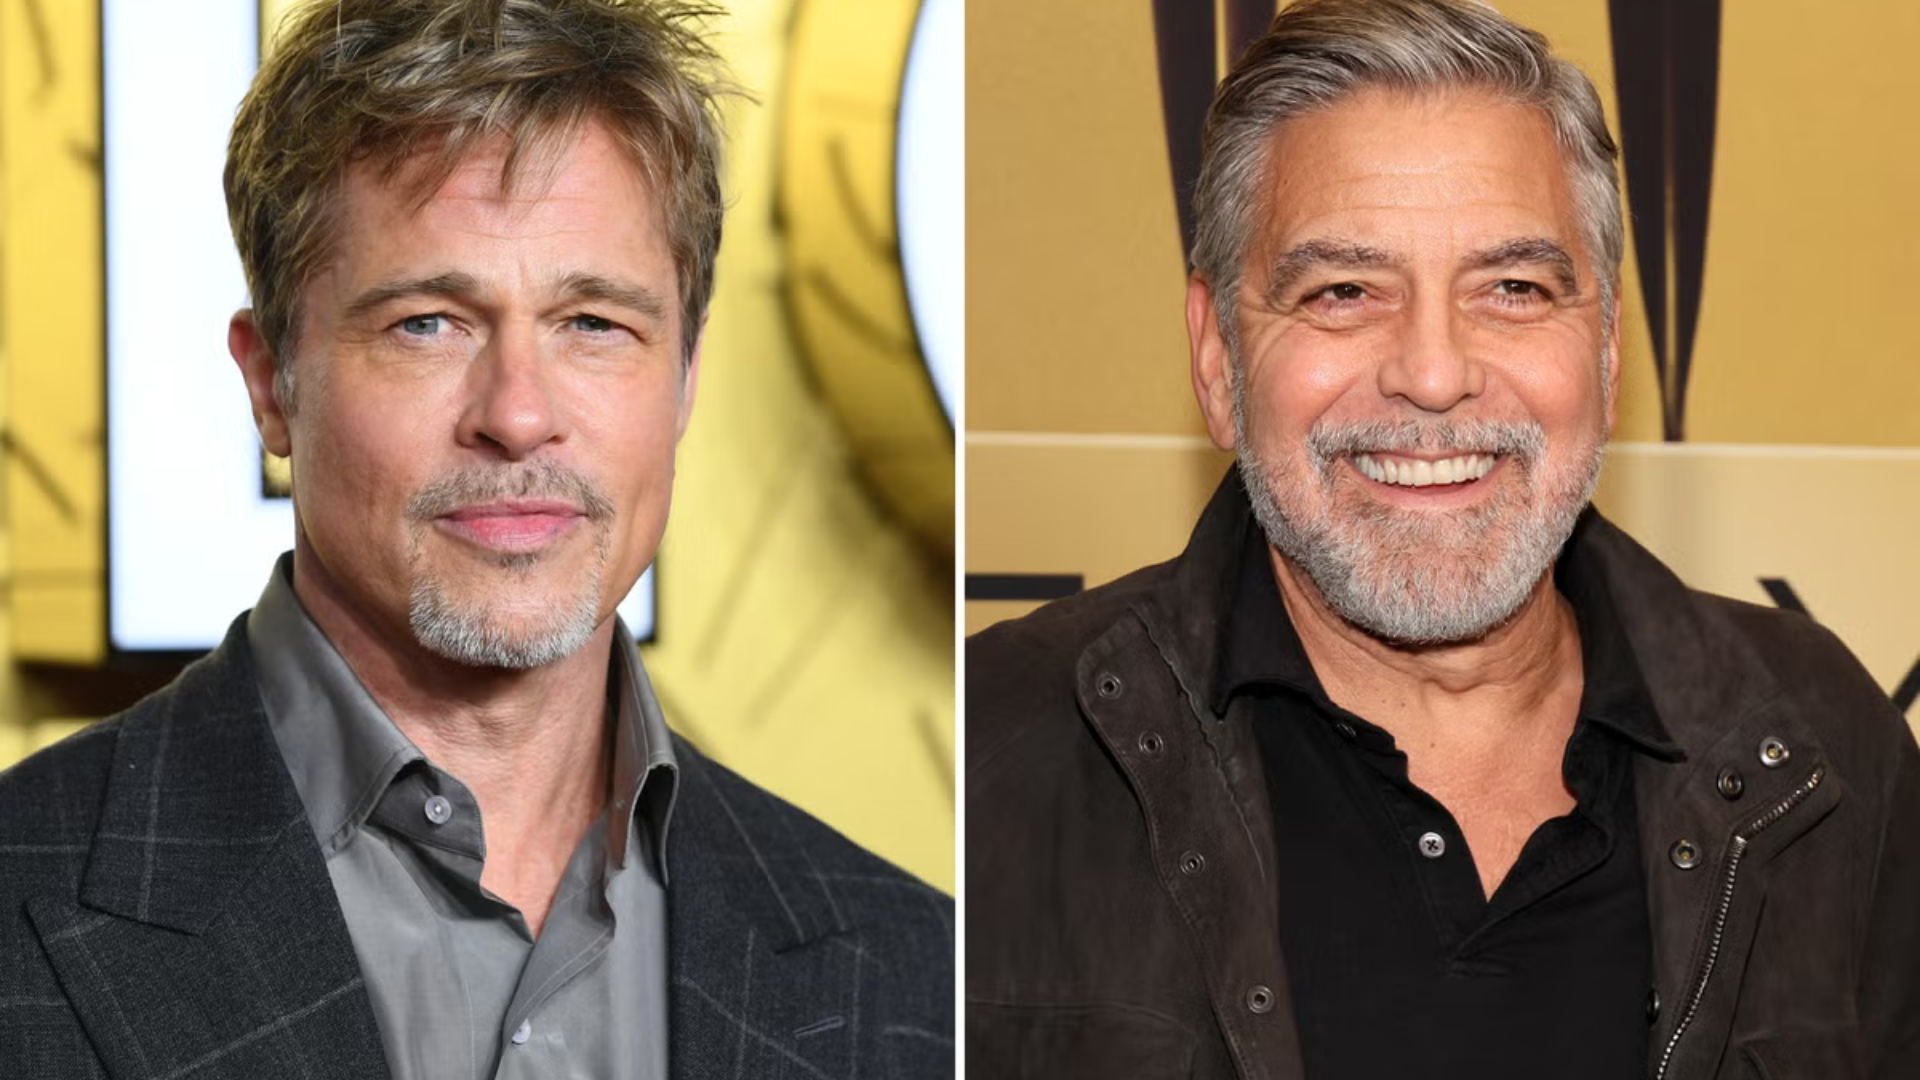 George Clooney and Brad Pitt Team Up Again in Exciting First Teaser for Action-Comedy 'Wolfs'